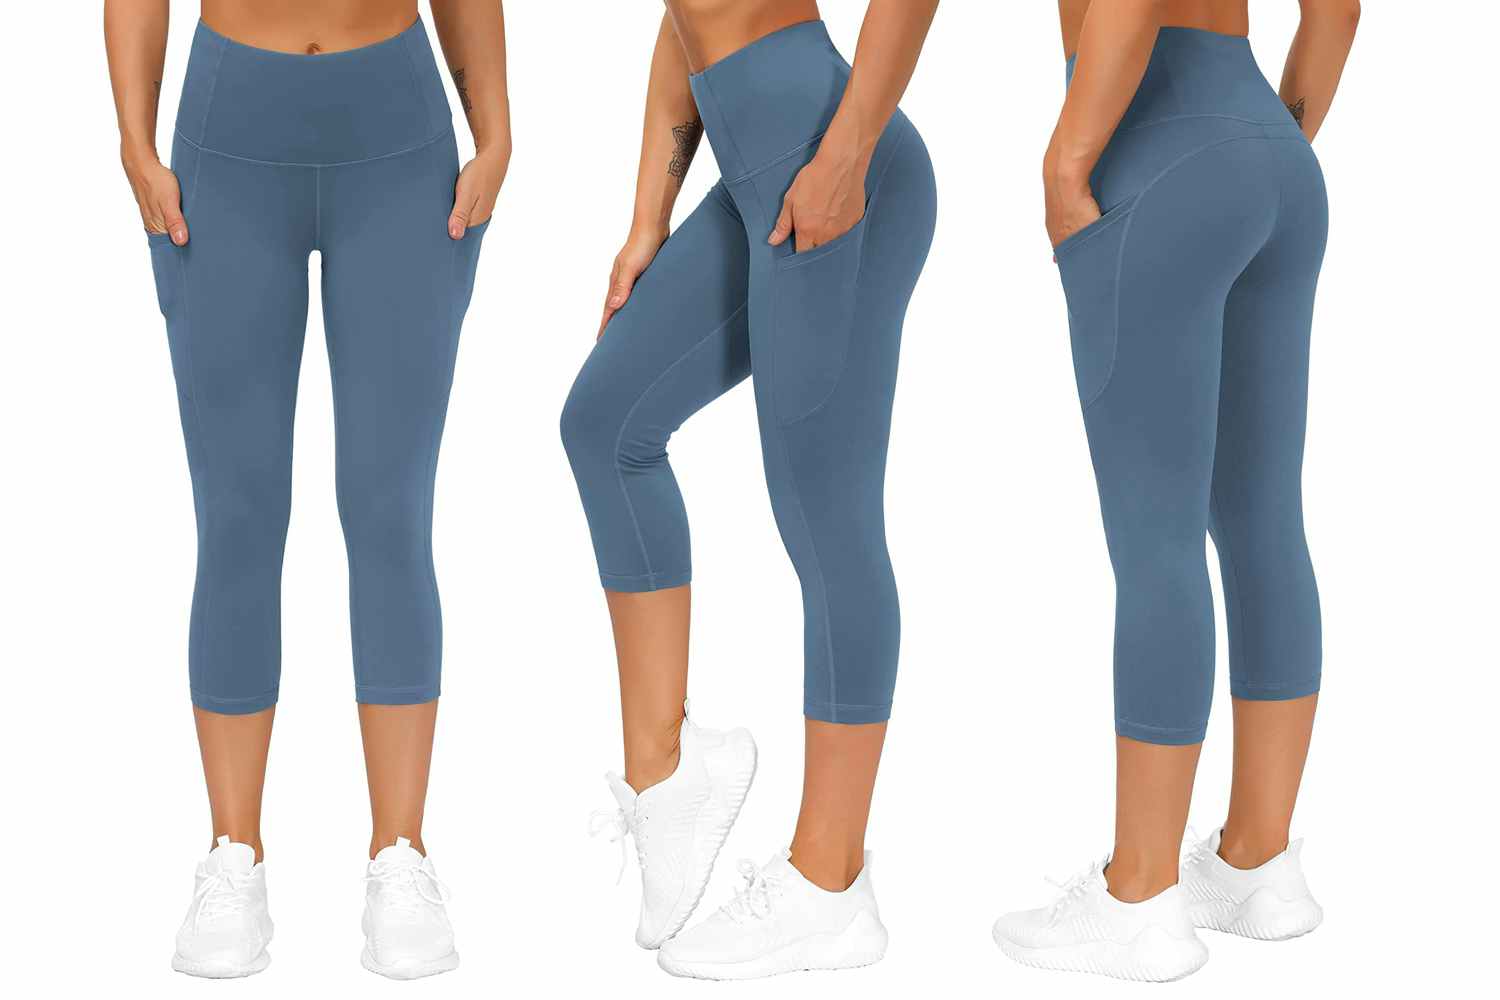 THE GYM PEOPLE Thick High Waist Yoga Pants with Pockets [Video] in